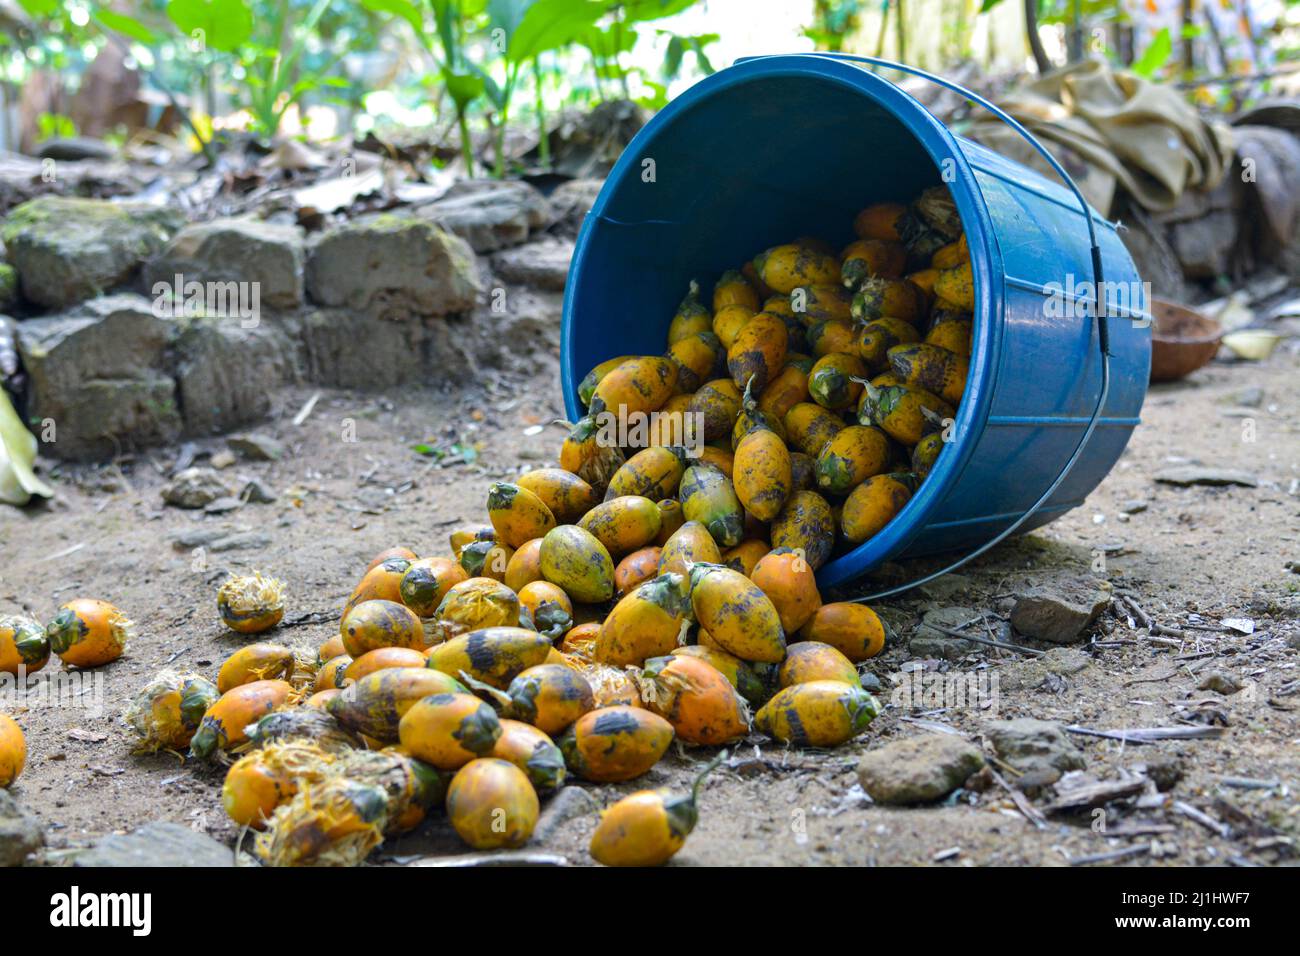 Lots of yellow arecanuts overturned in a blue bucket Stock Photo